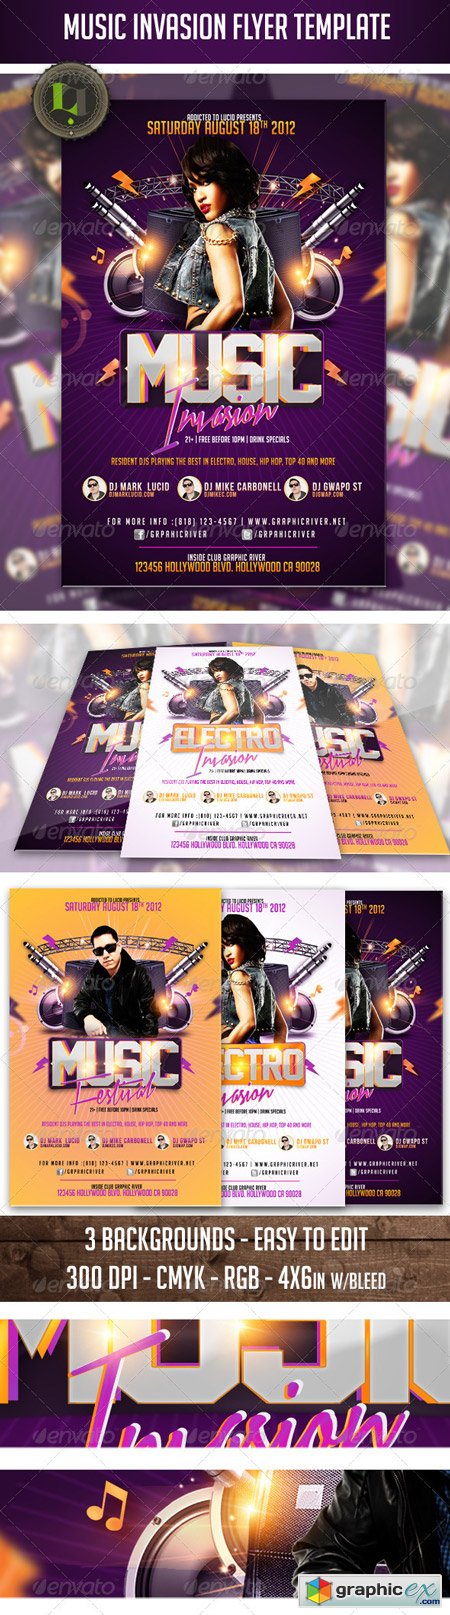 Music Invasion Flyer Template